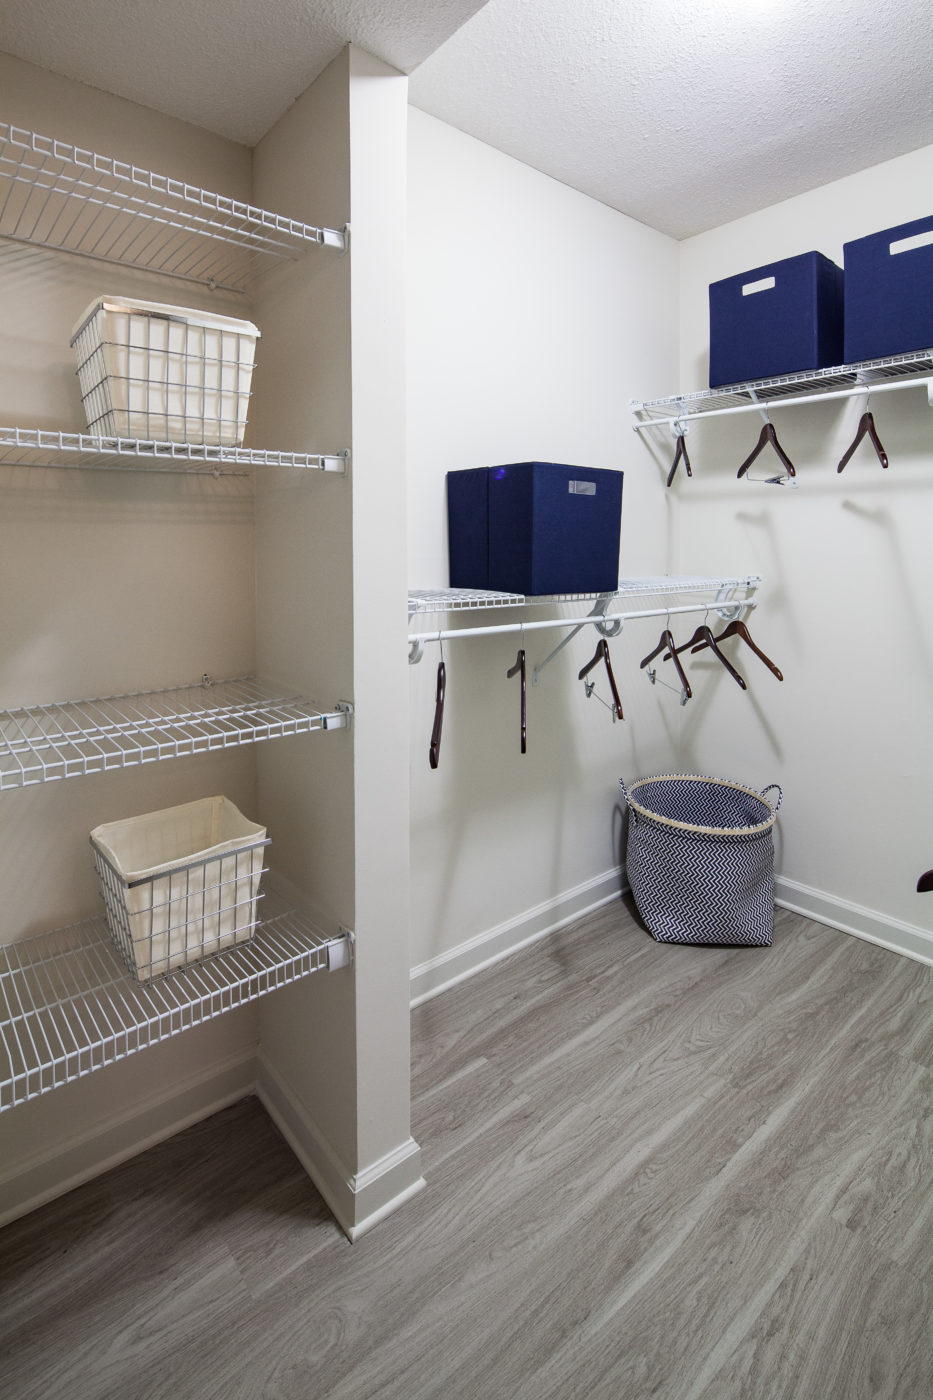 Closet storage area with white shelves and dark blue containers